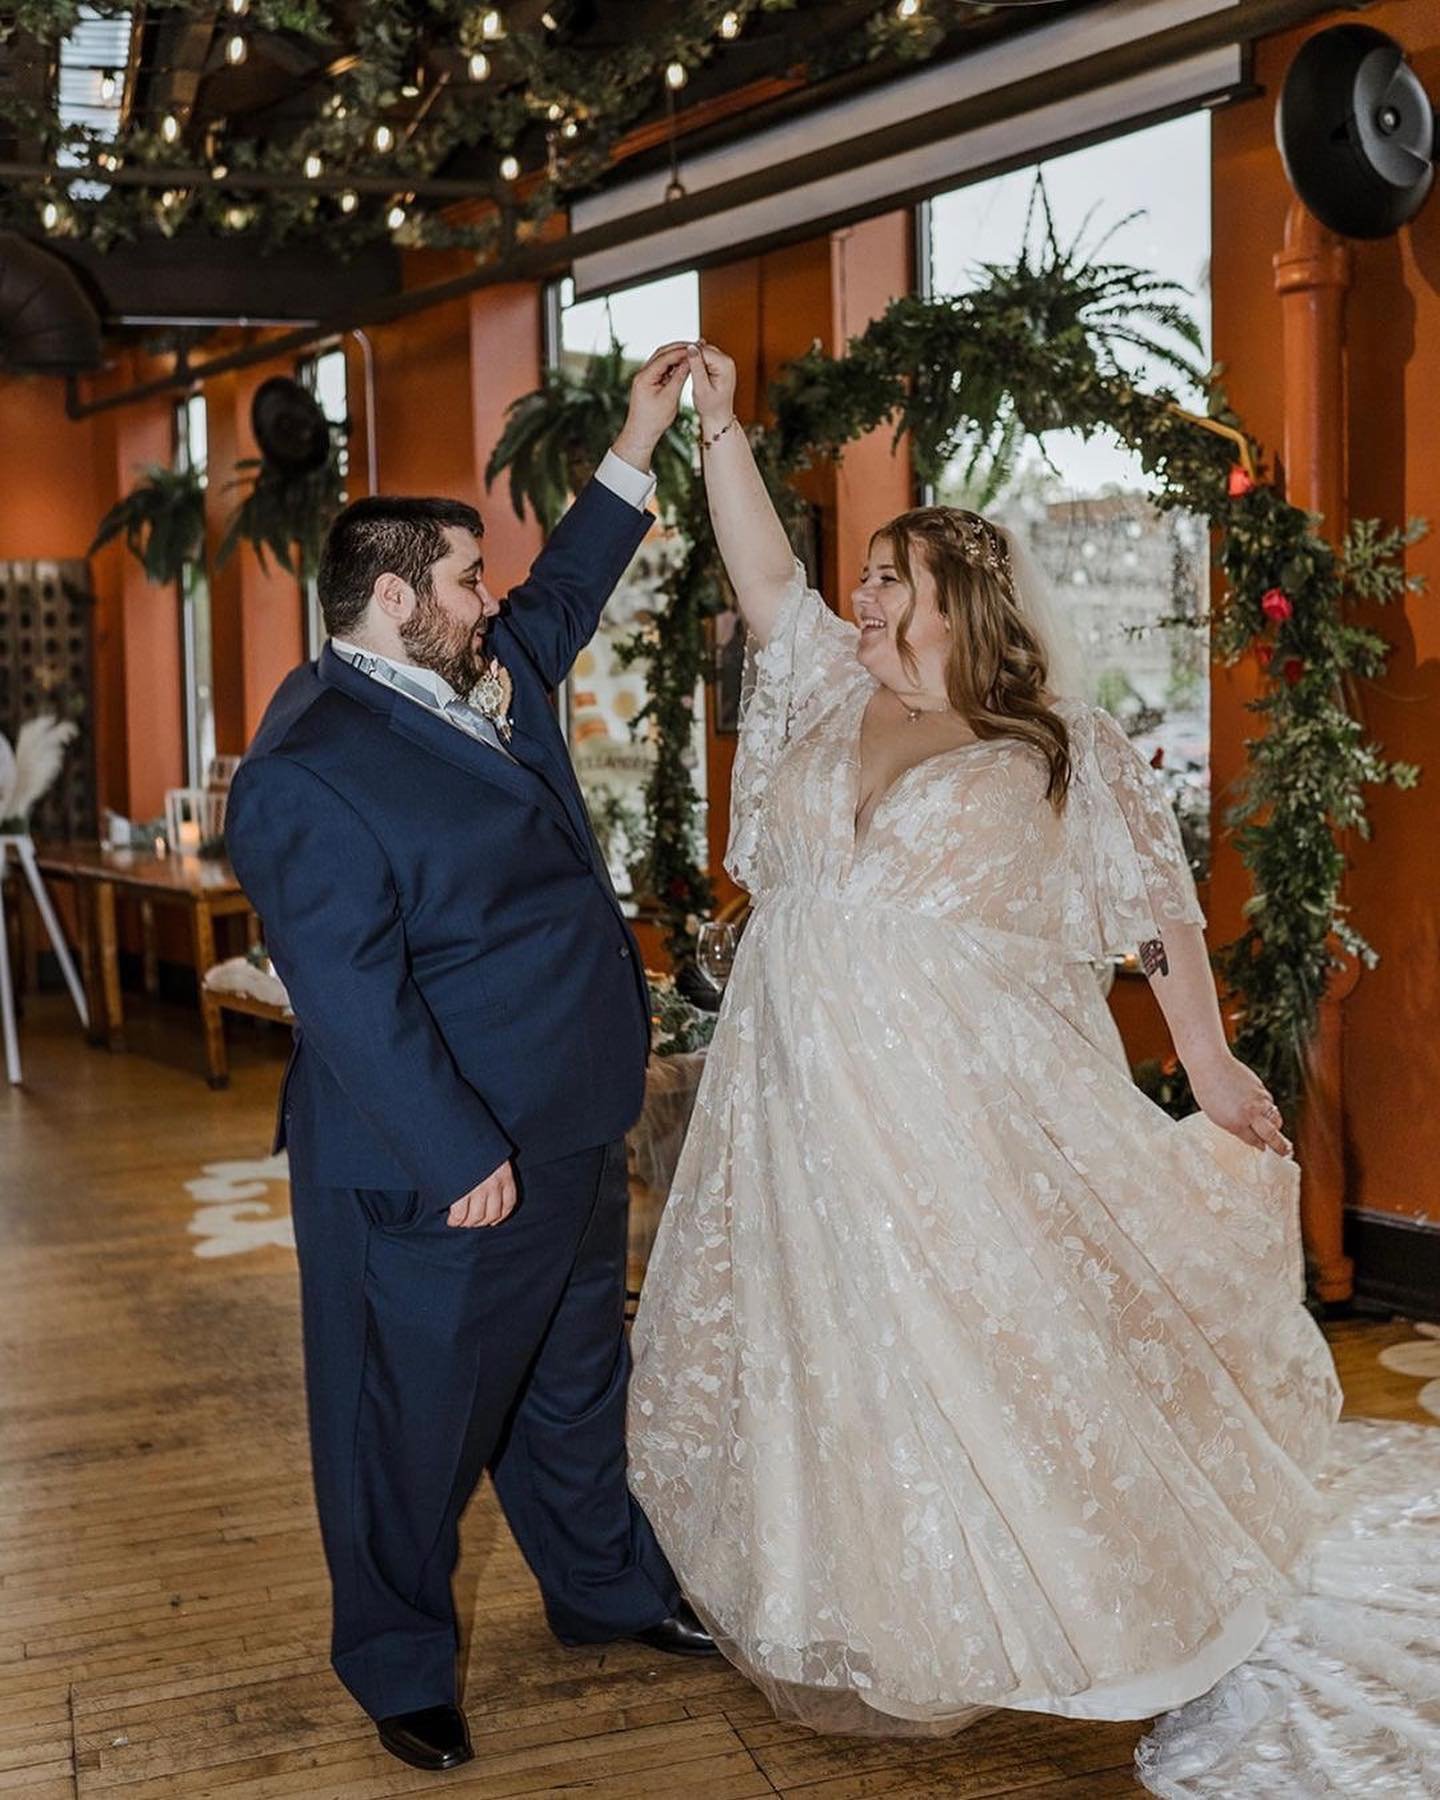 these sneak peaks from #RareBride mikaela have us dying to see more!  you both look absolutely stunning 🤩 congratulations 

if you are a rare bride who&rsquo;s gotten your photos back and want to share them with us, click the link in our bio to subm